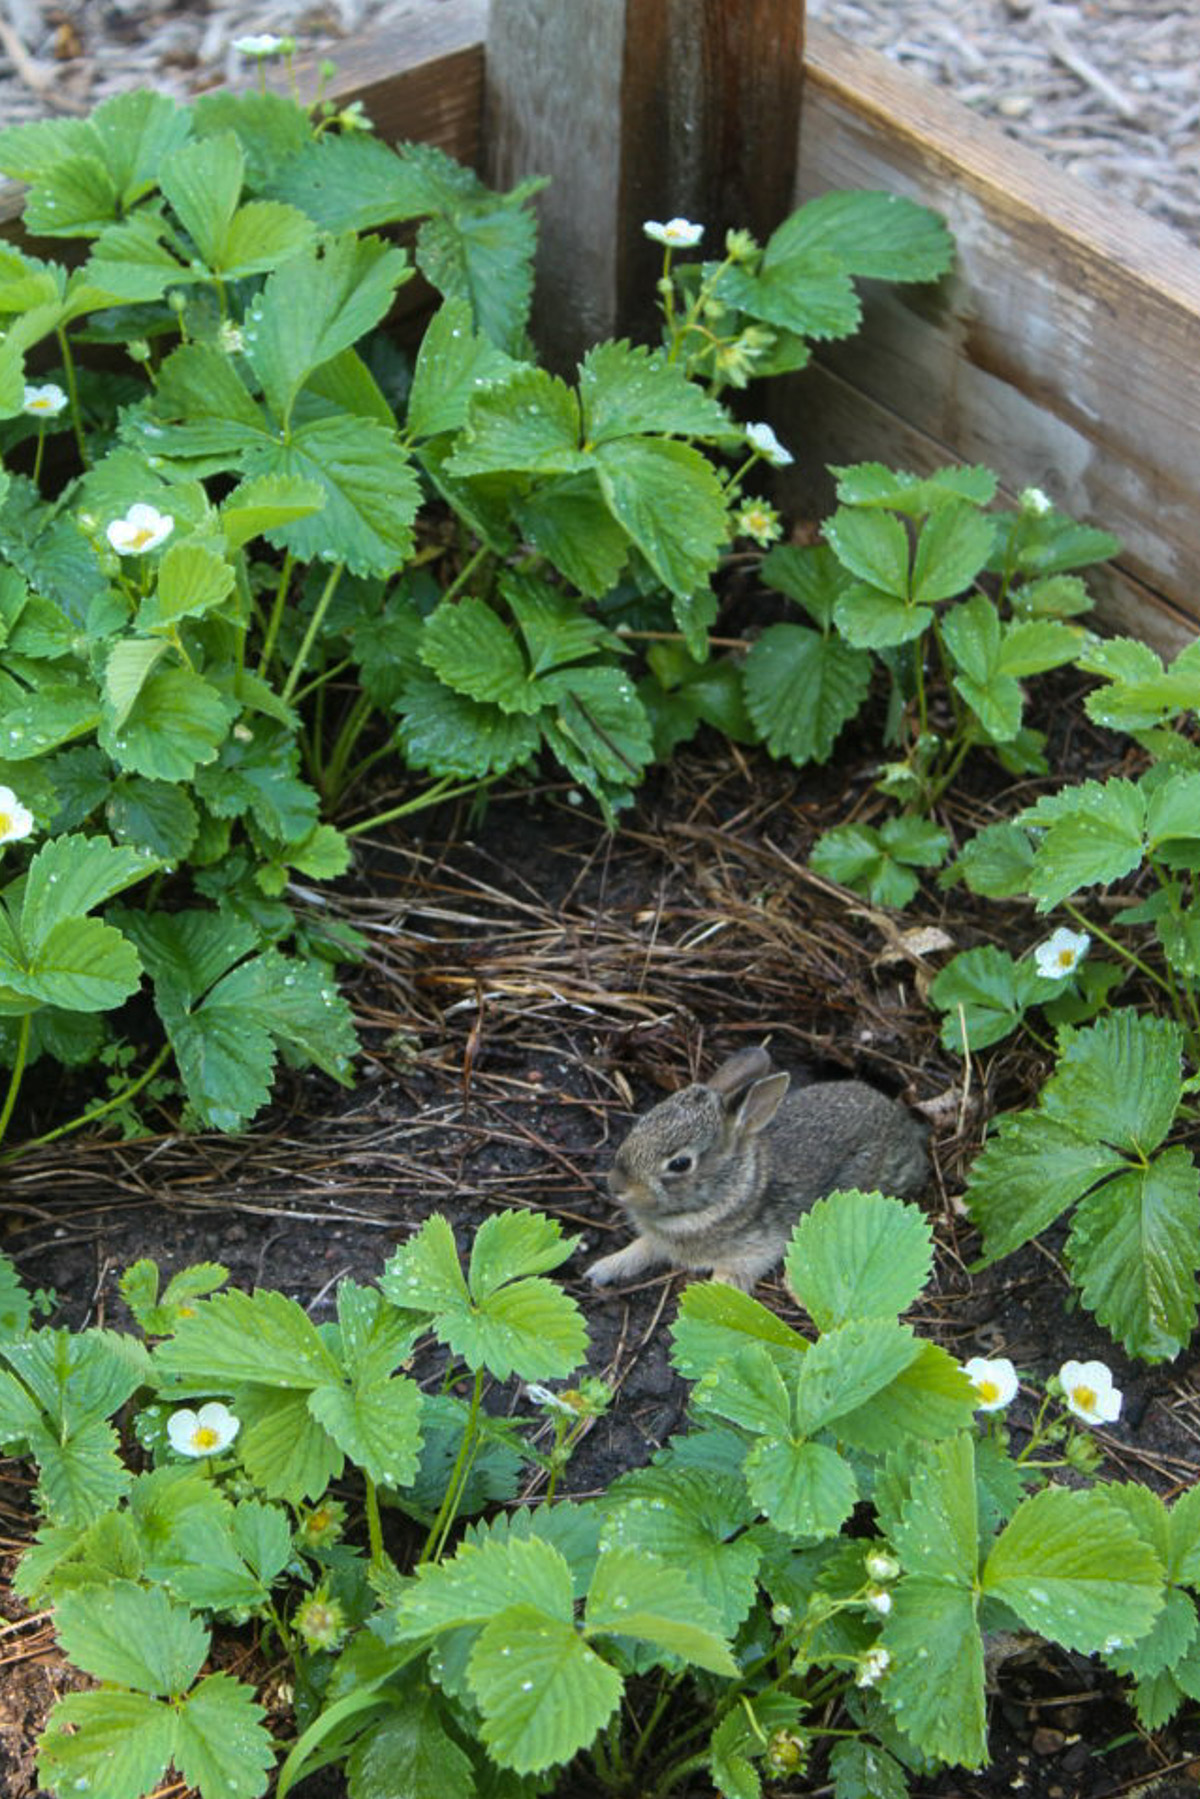 A baby bunny in the strawberry garden bed.